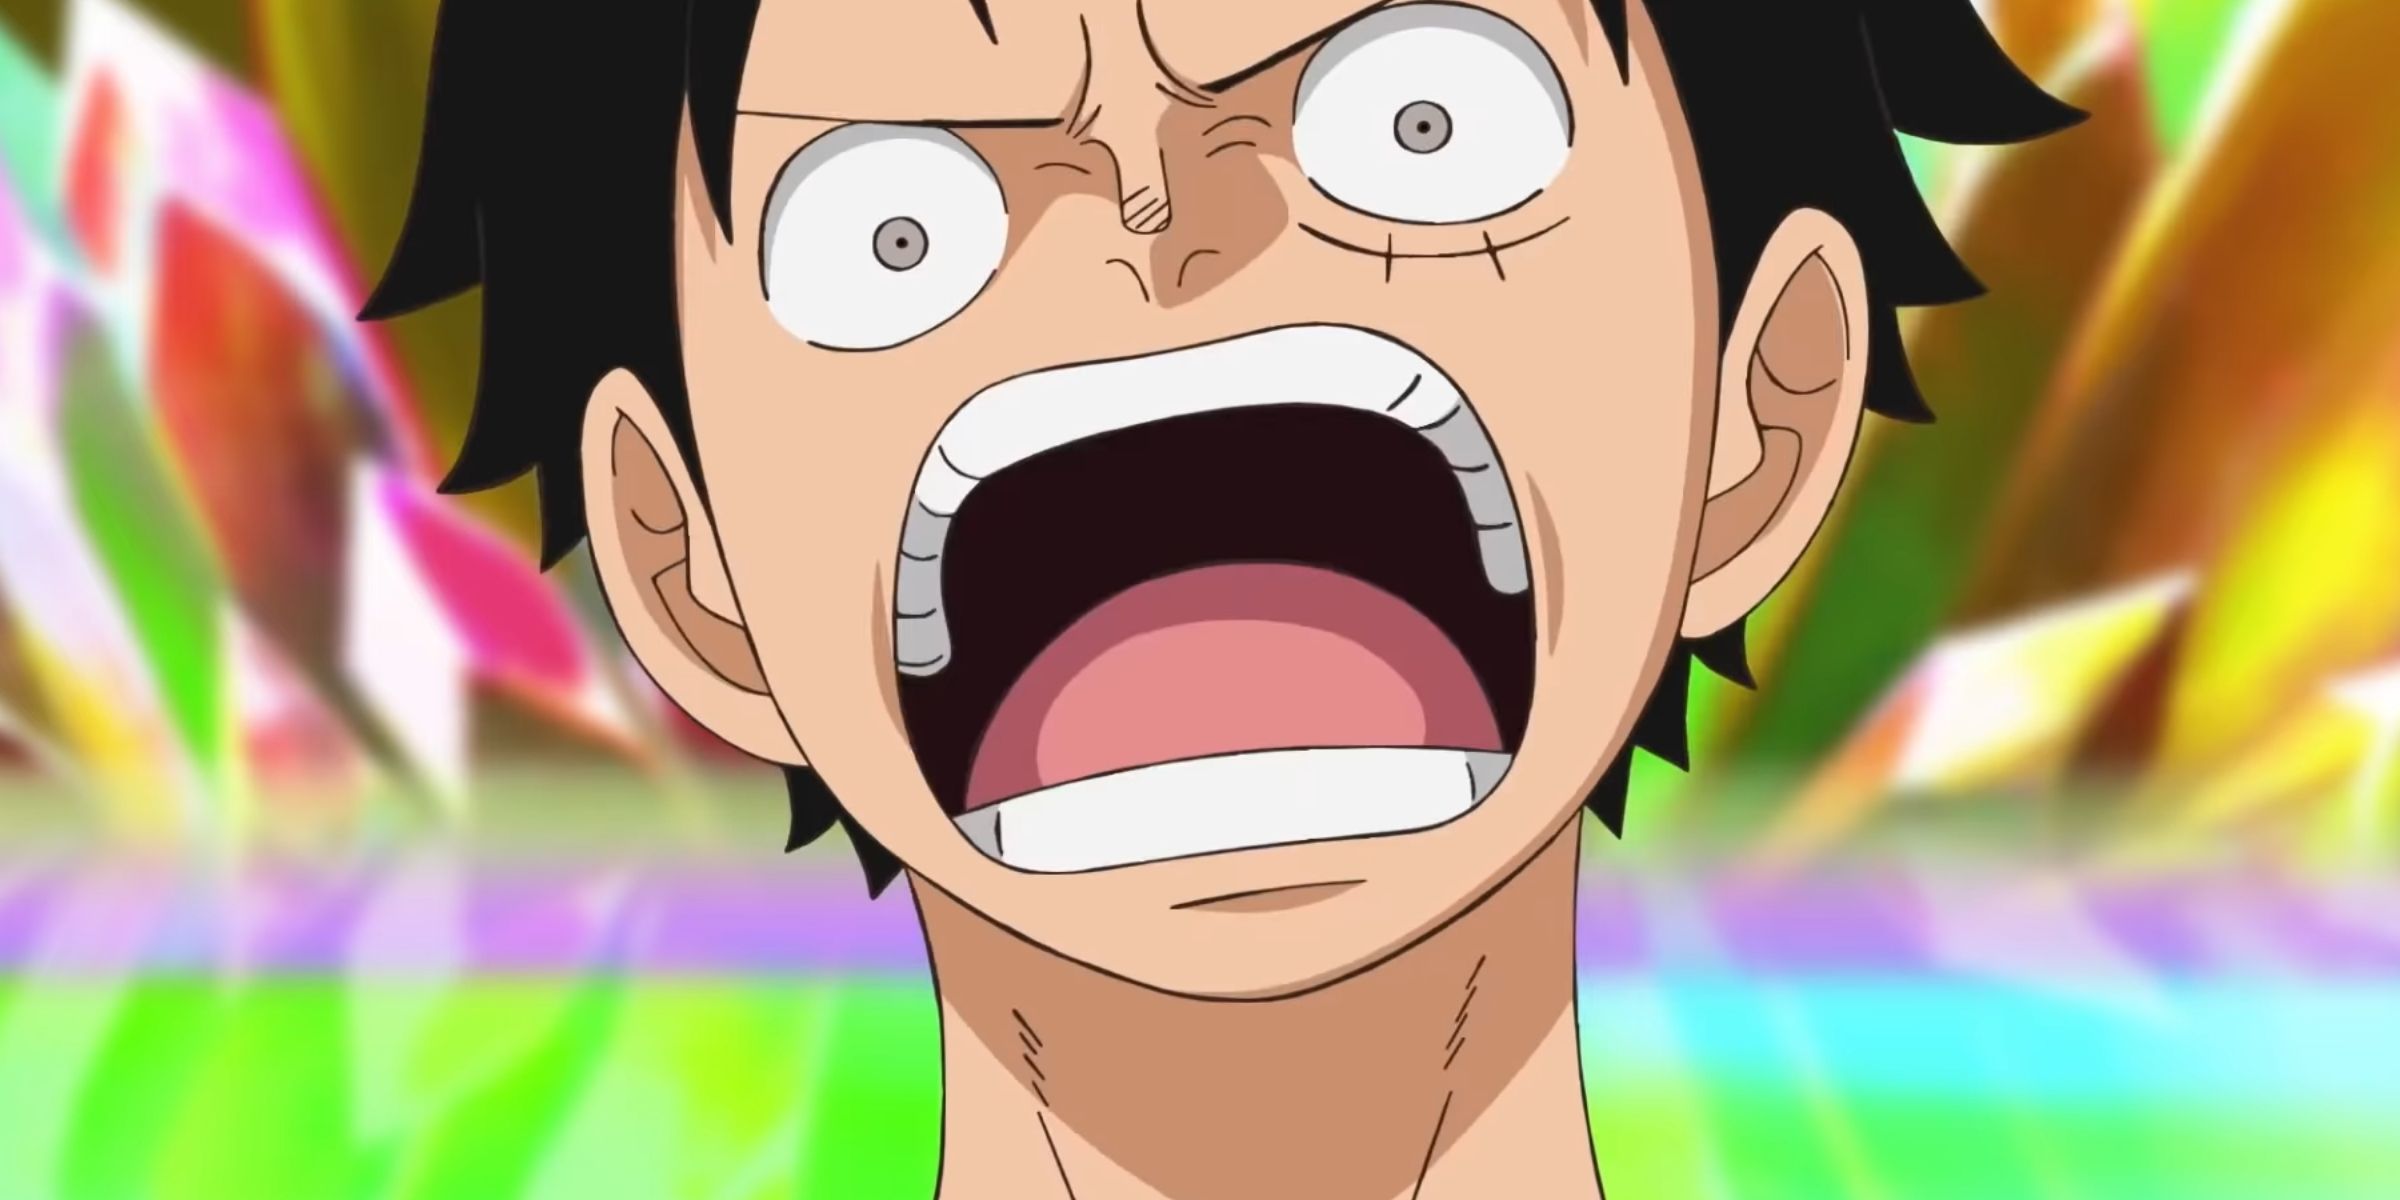 One Piece's Luffy shouting in shock with teeth bared